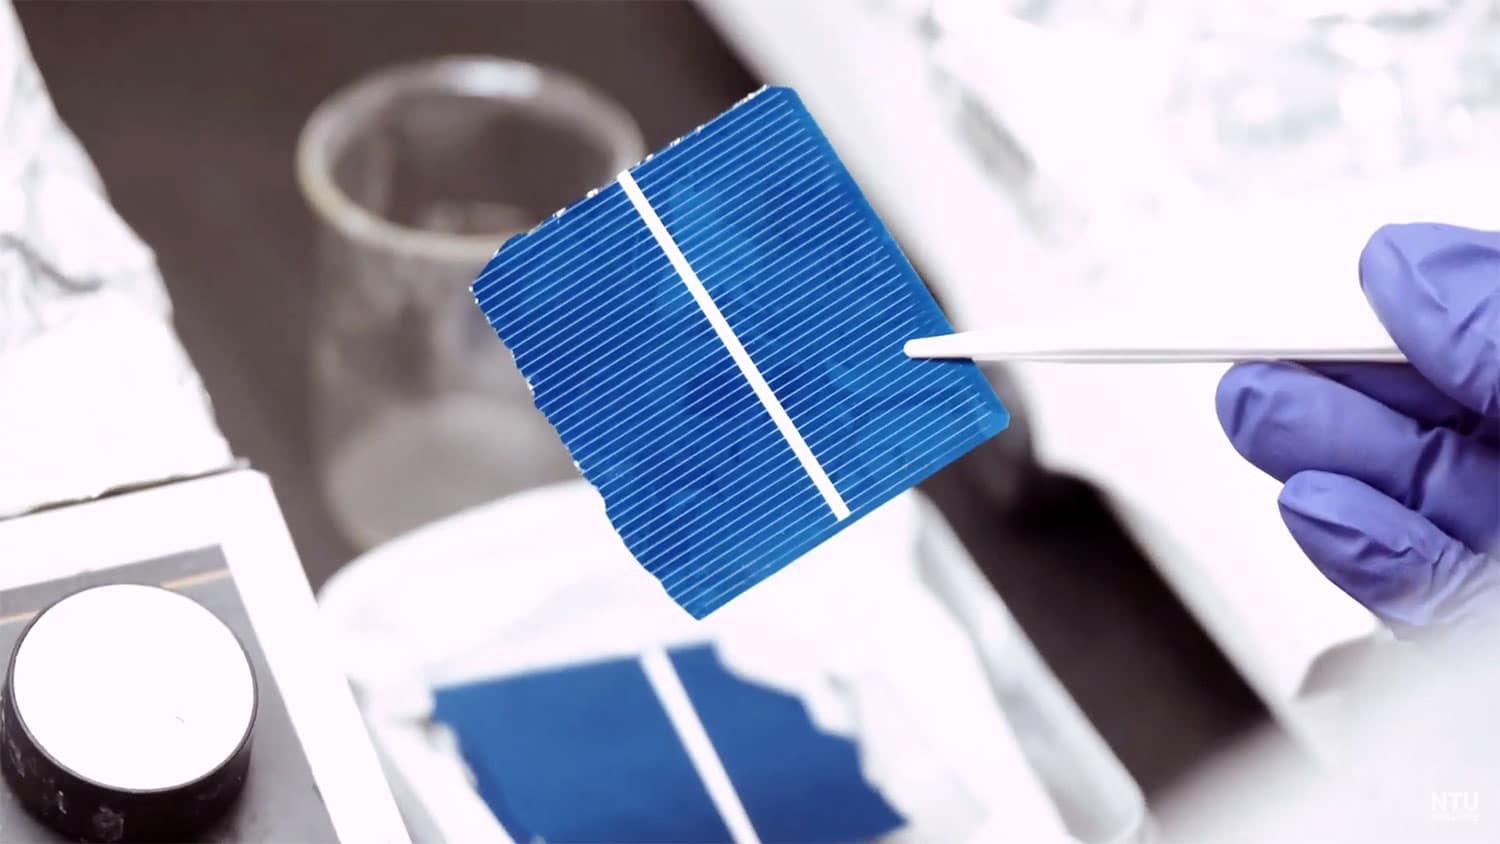 Recovering silicon from expired solar panels for use in lithium-ion batteries.